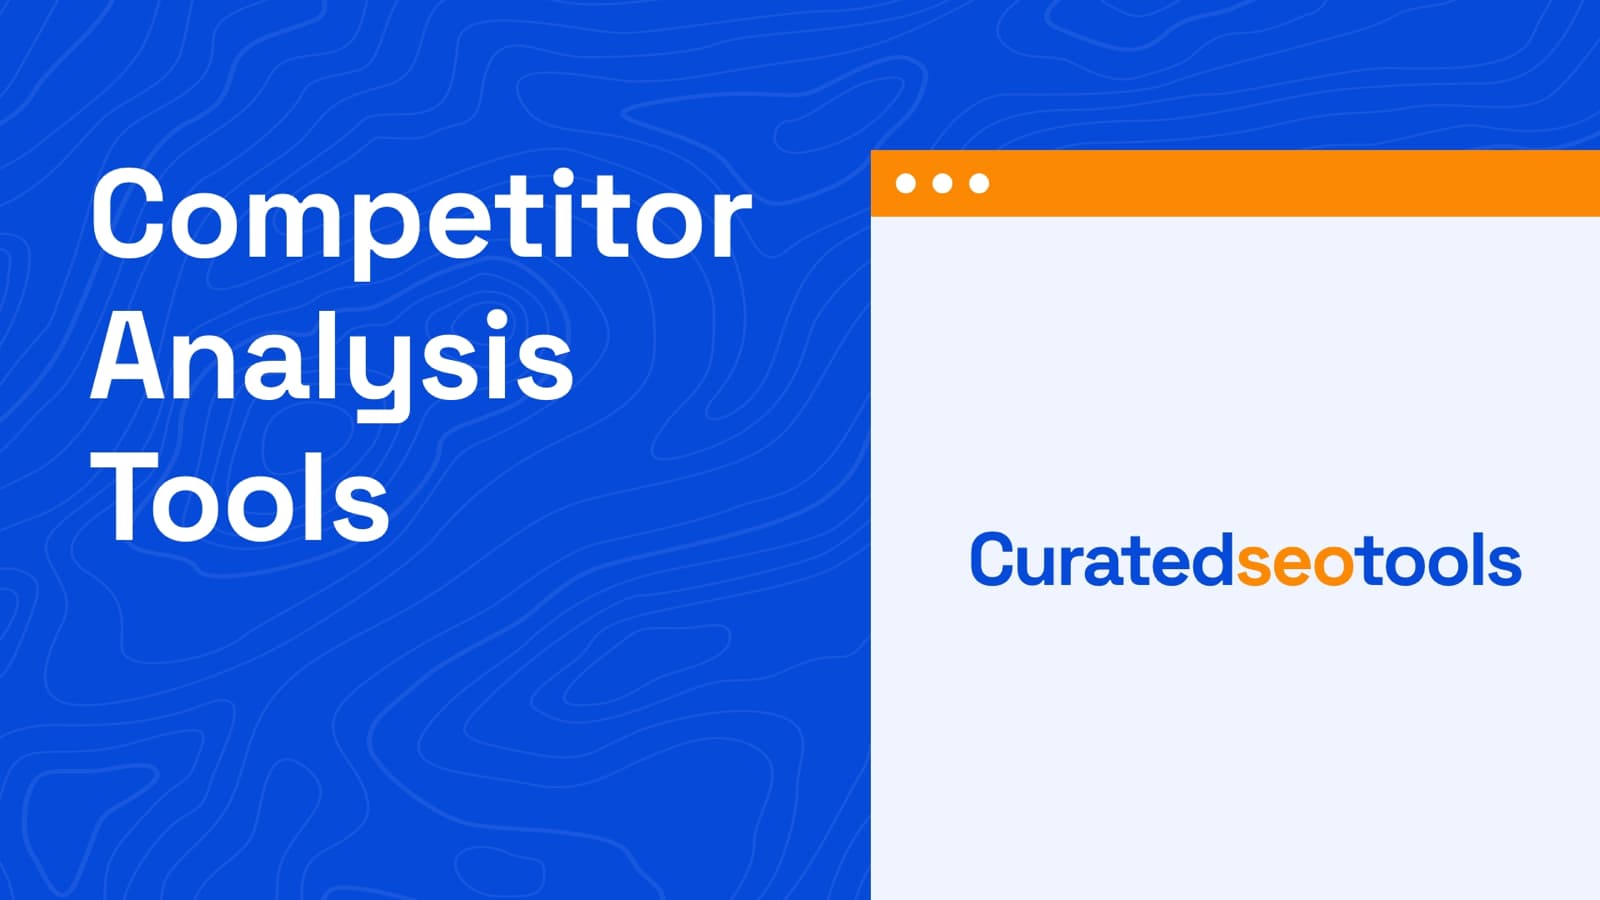 The cover image about the content title which is "Competitor Analysis Tools" and a browser shaped graphic element